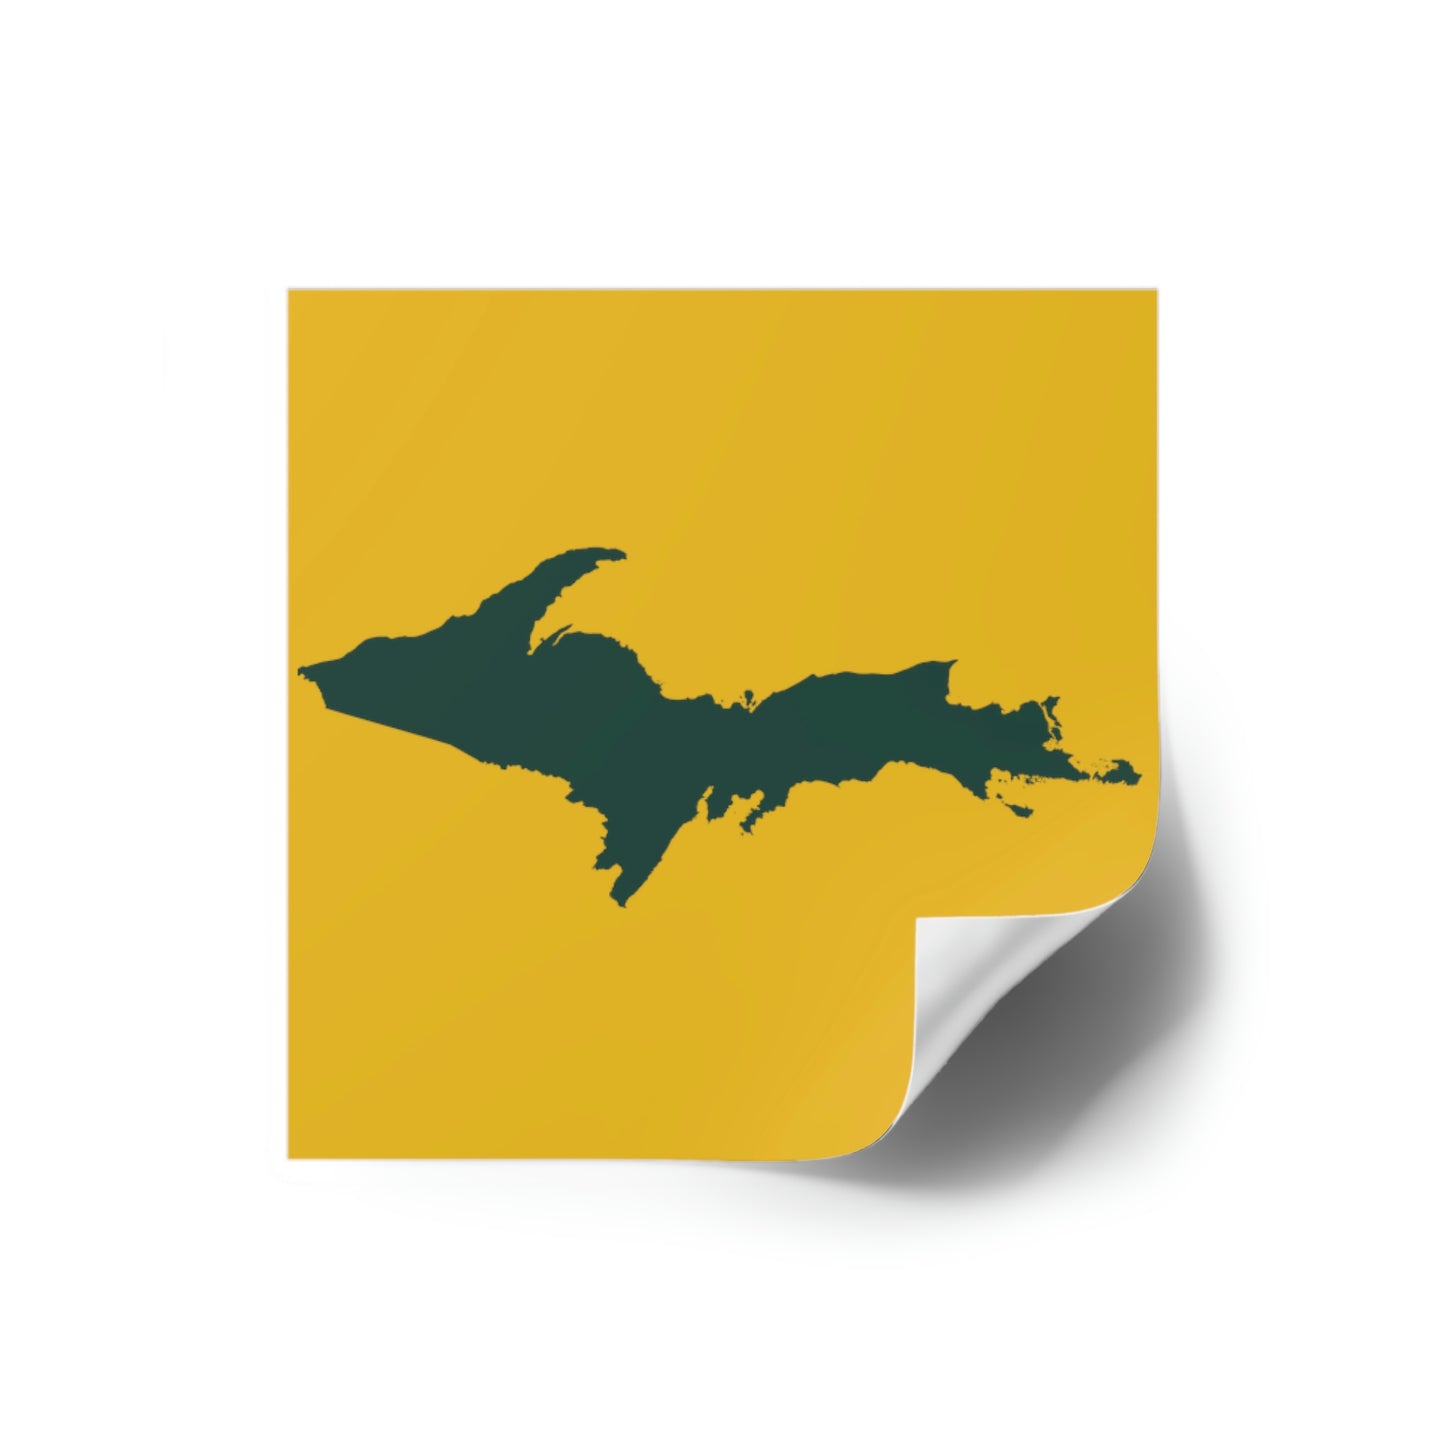 Michigan Upper Peninsula Square Sticker (Gold w/ Green UP Outline) | Indoor/Outdoor